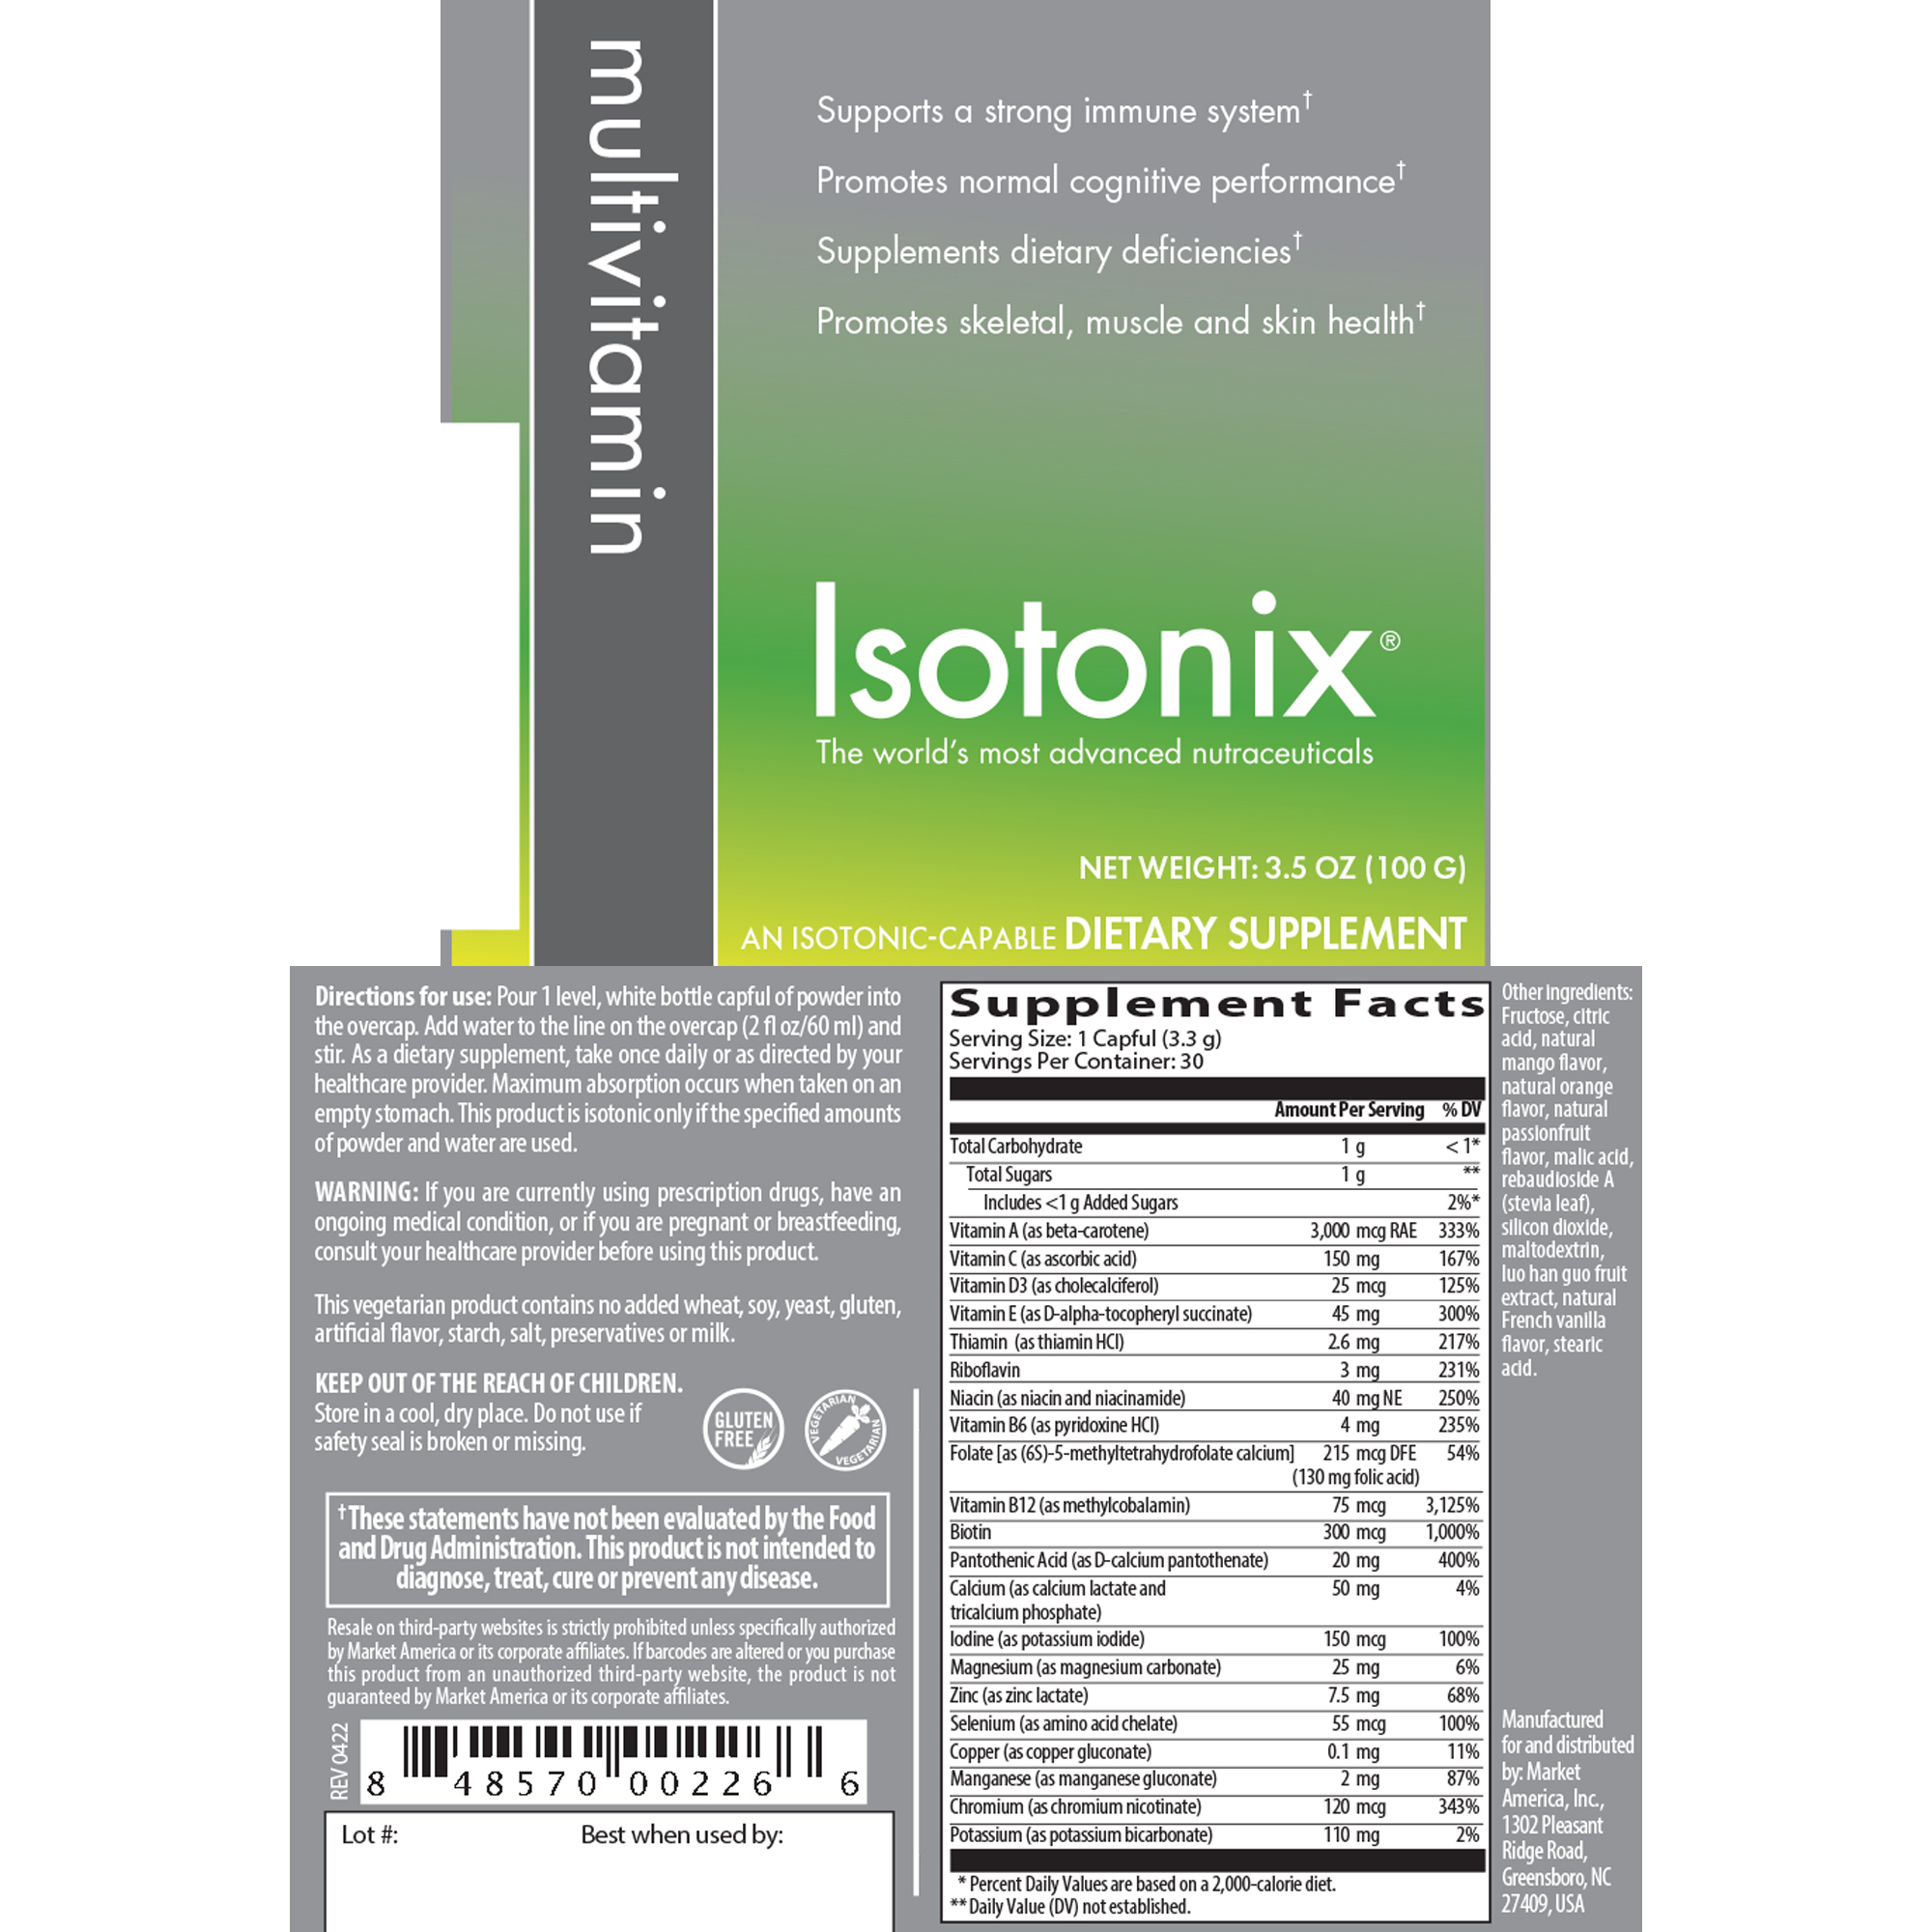 Isotonix® Daily Essentials Kit (Without Iron)